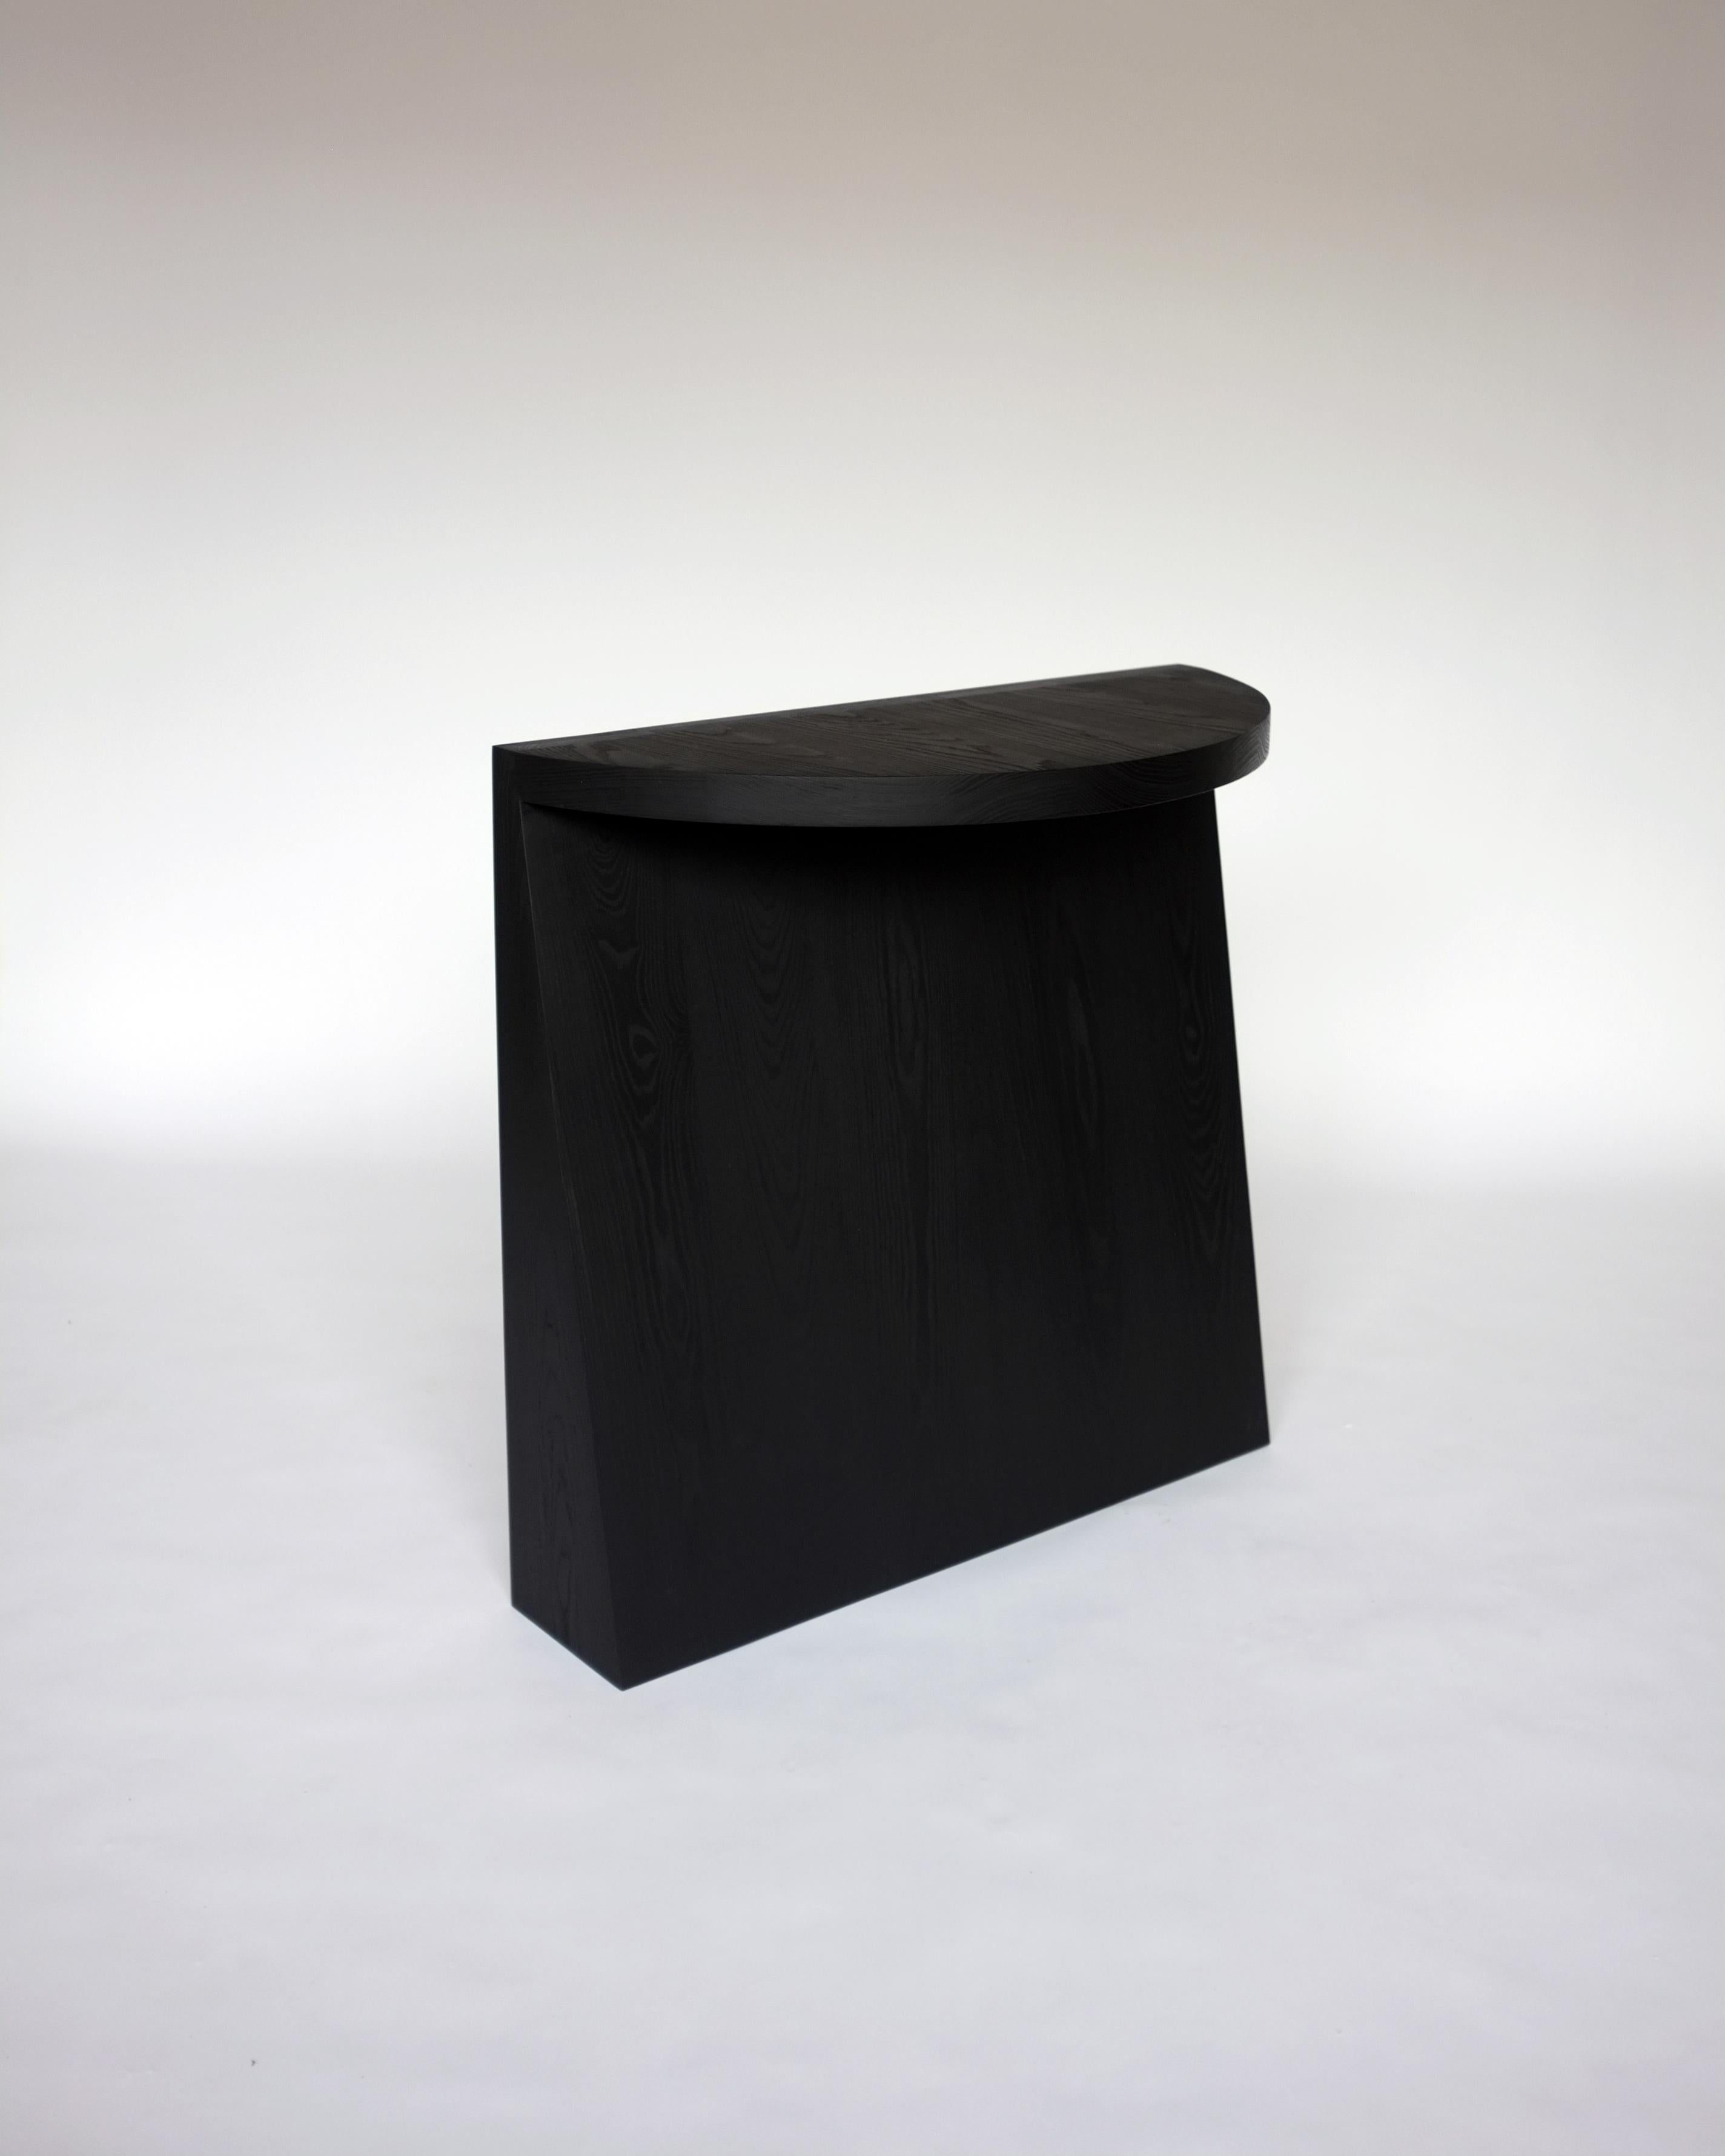 Minimalist Minimal Sculptural Geometric Black Dyed Ash Wood Console Table by Campagna